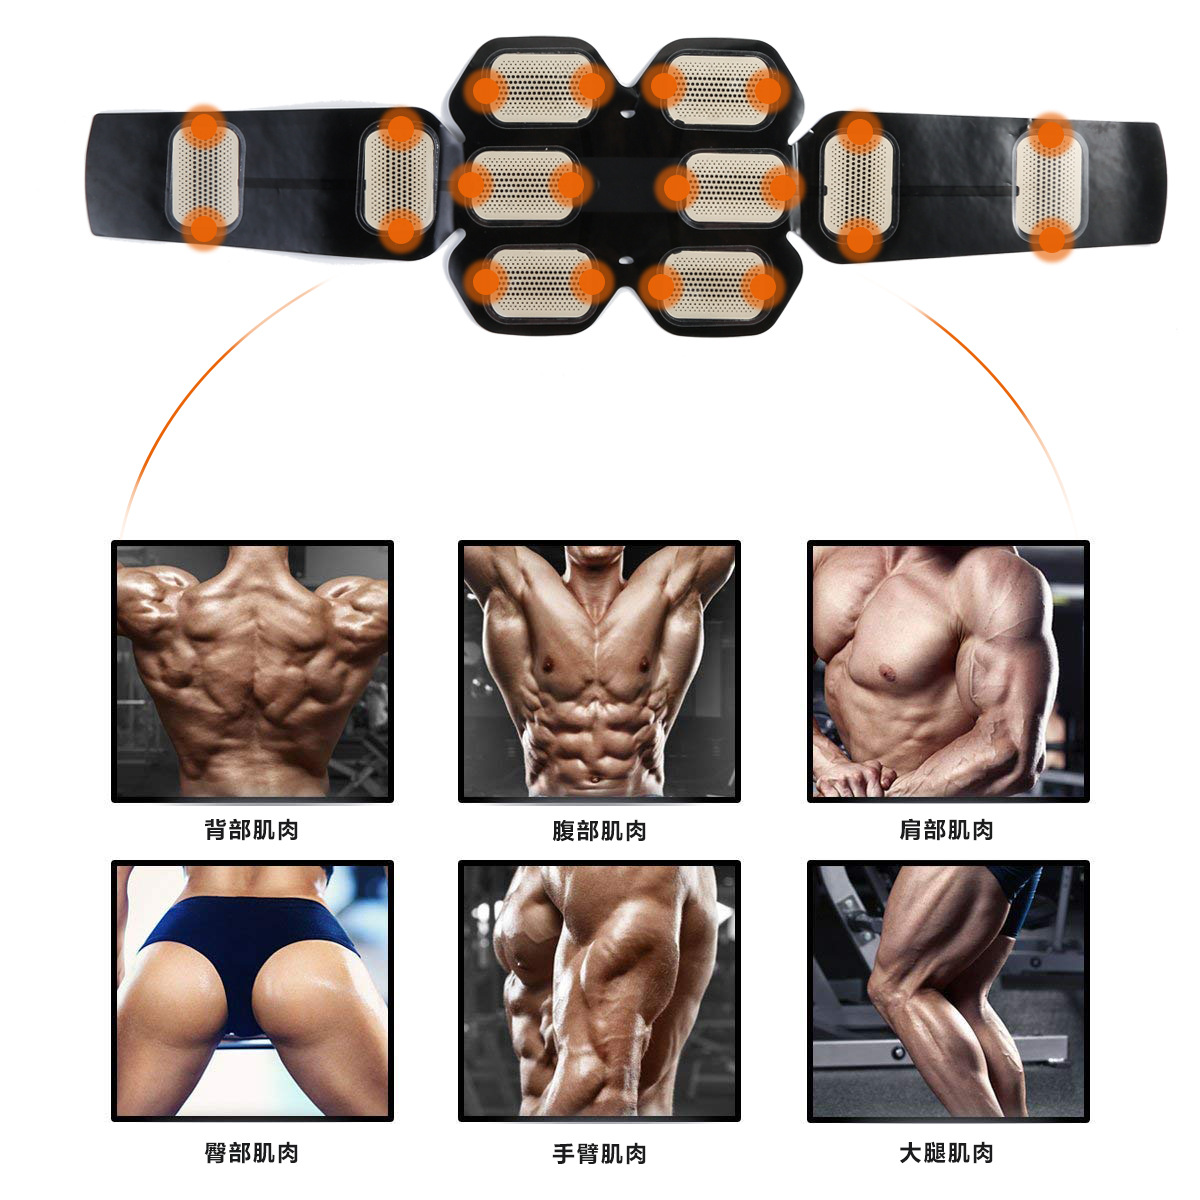 Smart EMS Electric Pulse Treatment Massager Vibration Abdominal Muscle Trainer Home Gym Waist Belly Exercise Fitness Equipment